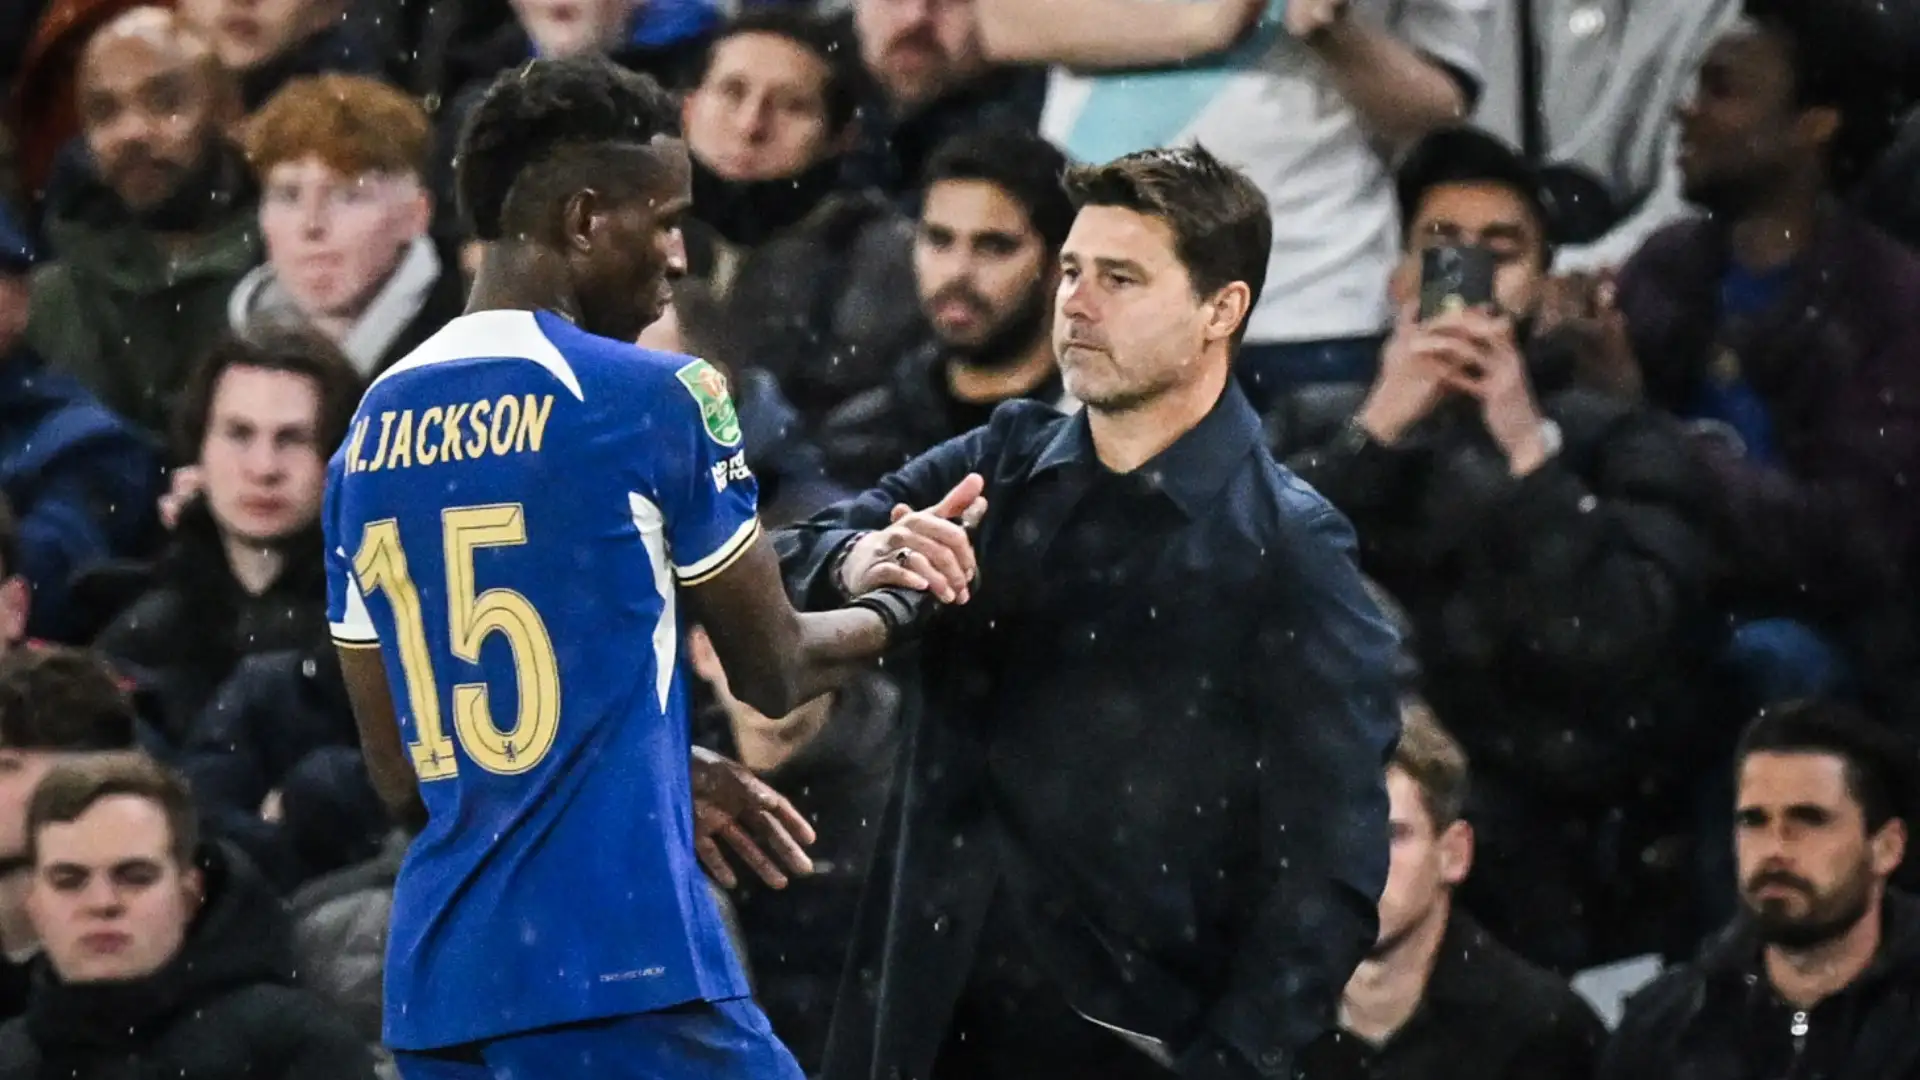 'Love you coach' - Mauricio Pochettino labelled a 'true lion' as Nicolas Jackson appears to question Chelsea owners' decision to part ways with Argentine boss